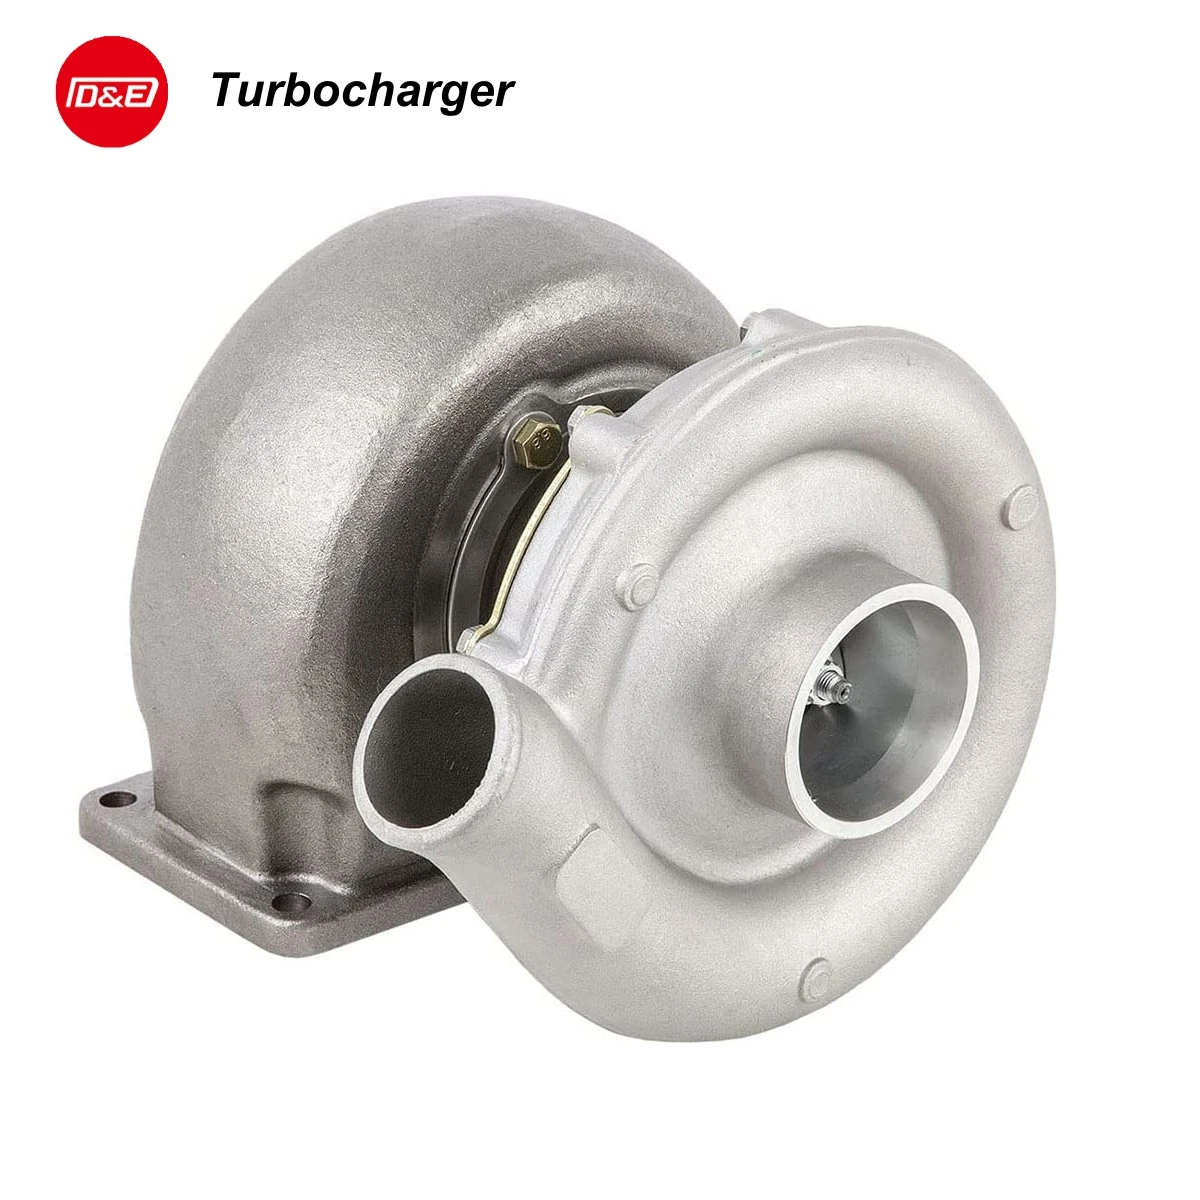 

Full new aftermarket part truck turbocharger turbo for Caterpillar 4N-8969 159623 0R5809 D333C 3306 engine